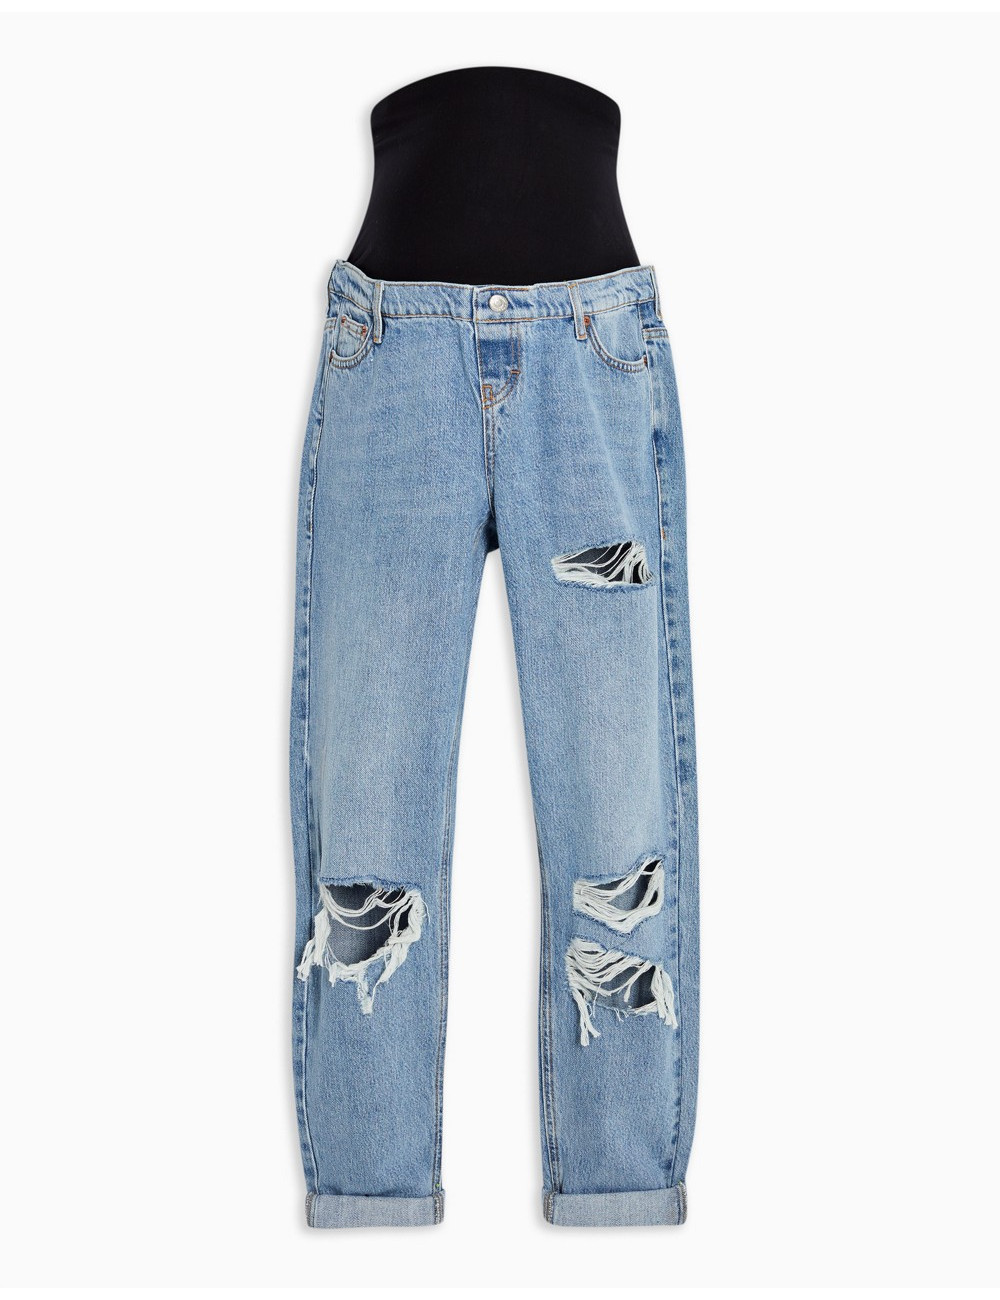 Topshop Maternity Mom jeans...